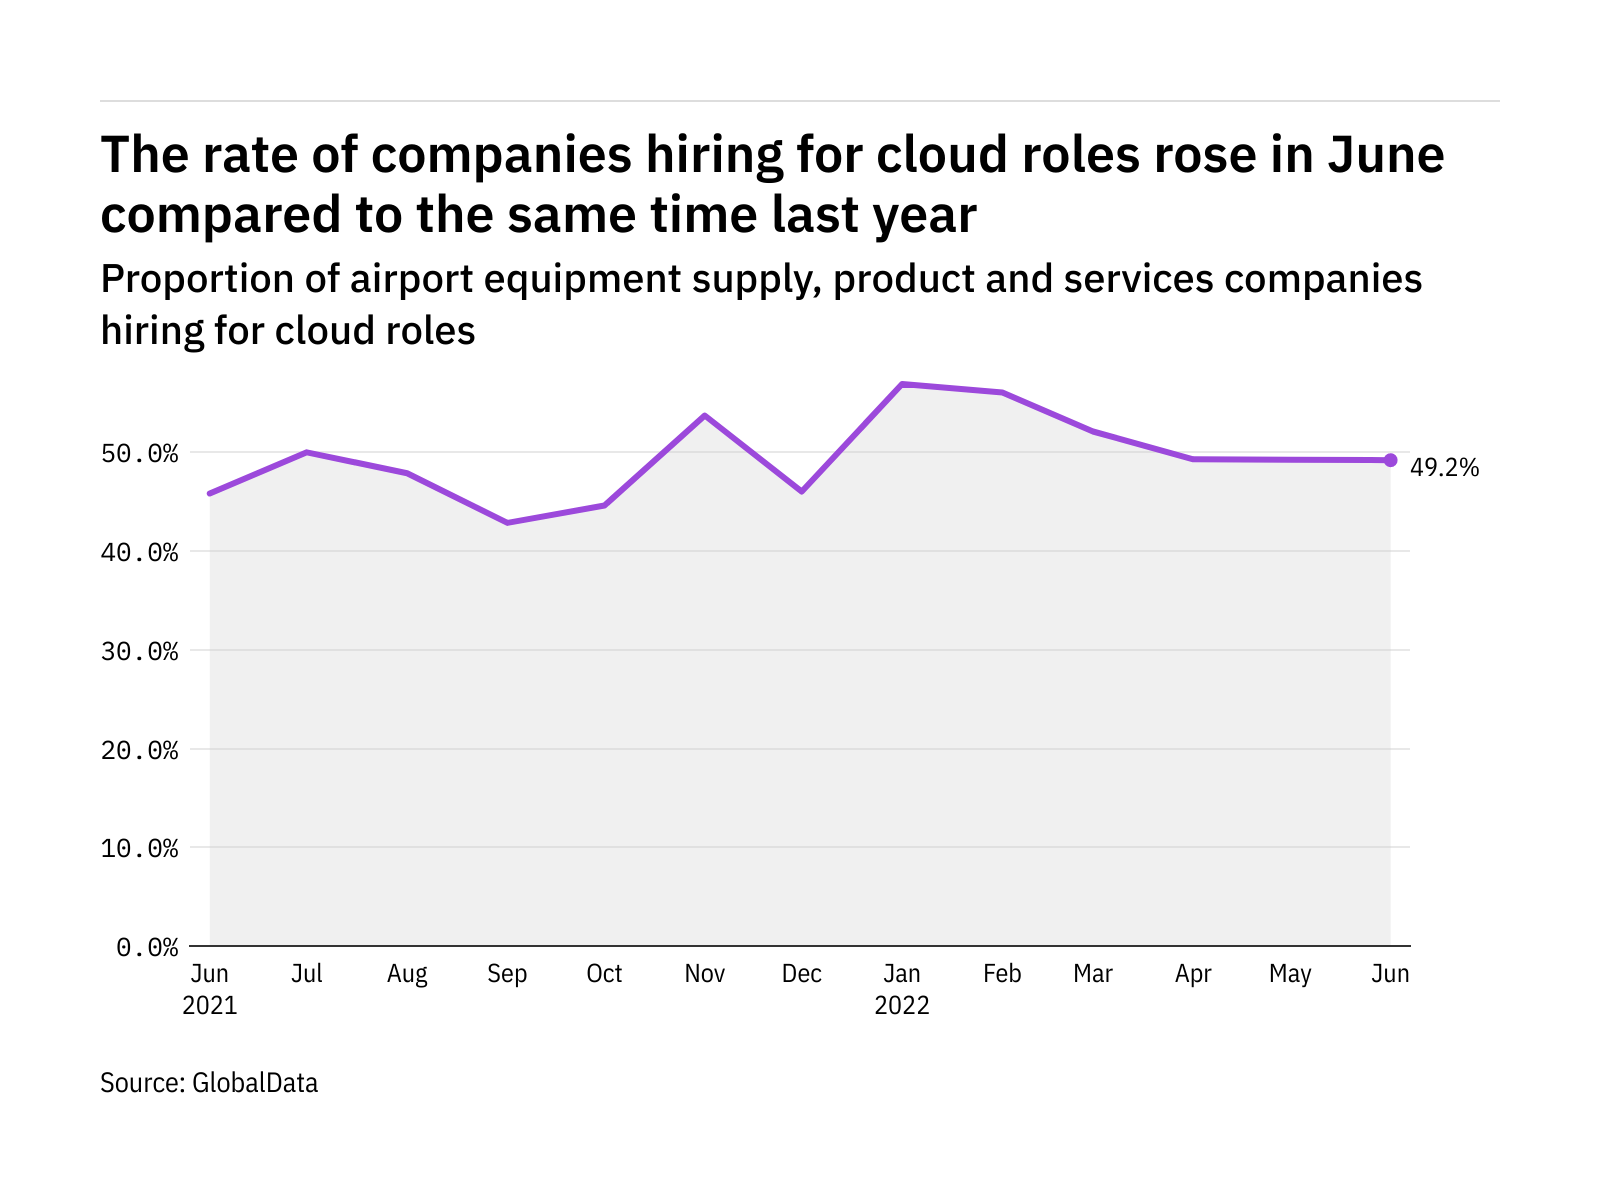 Cloud hiring levels in the airport industry rose in June 2022